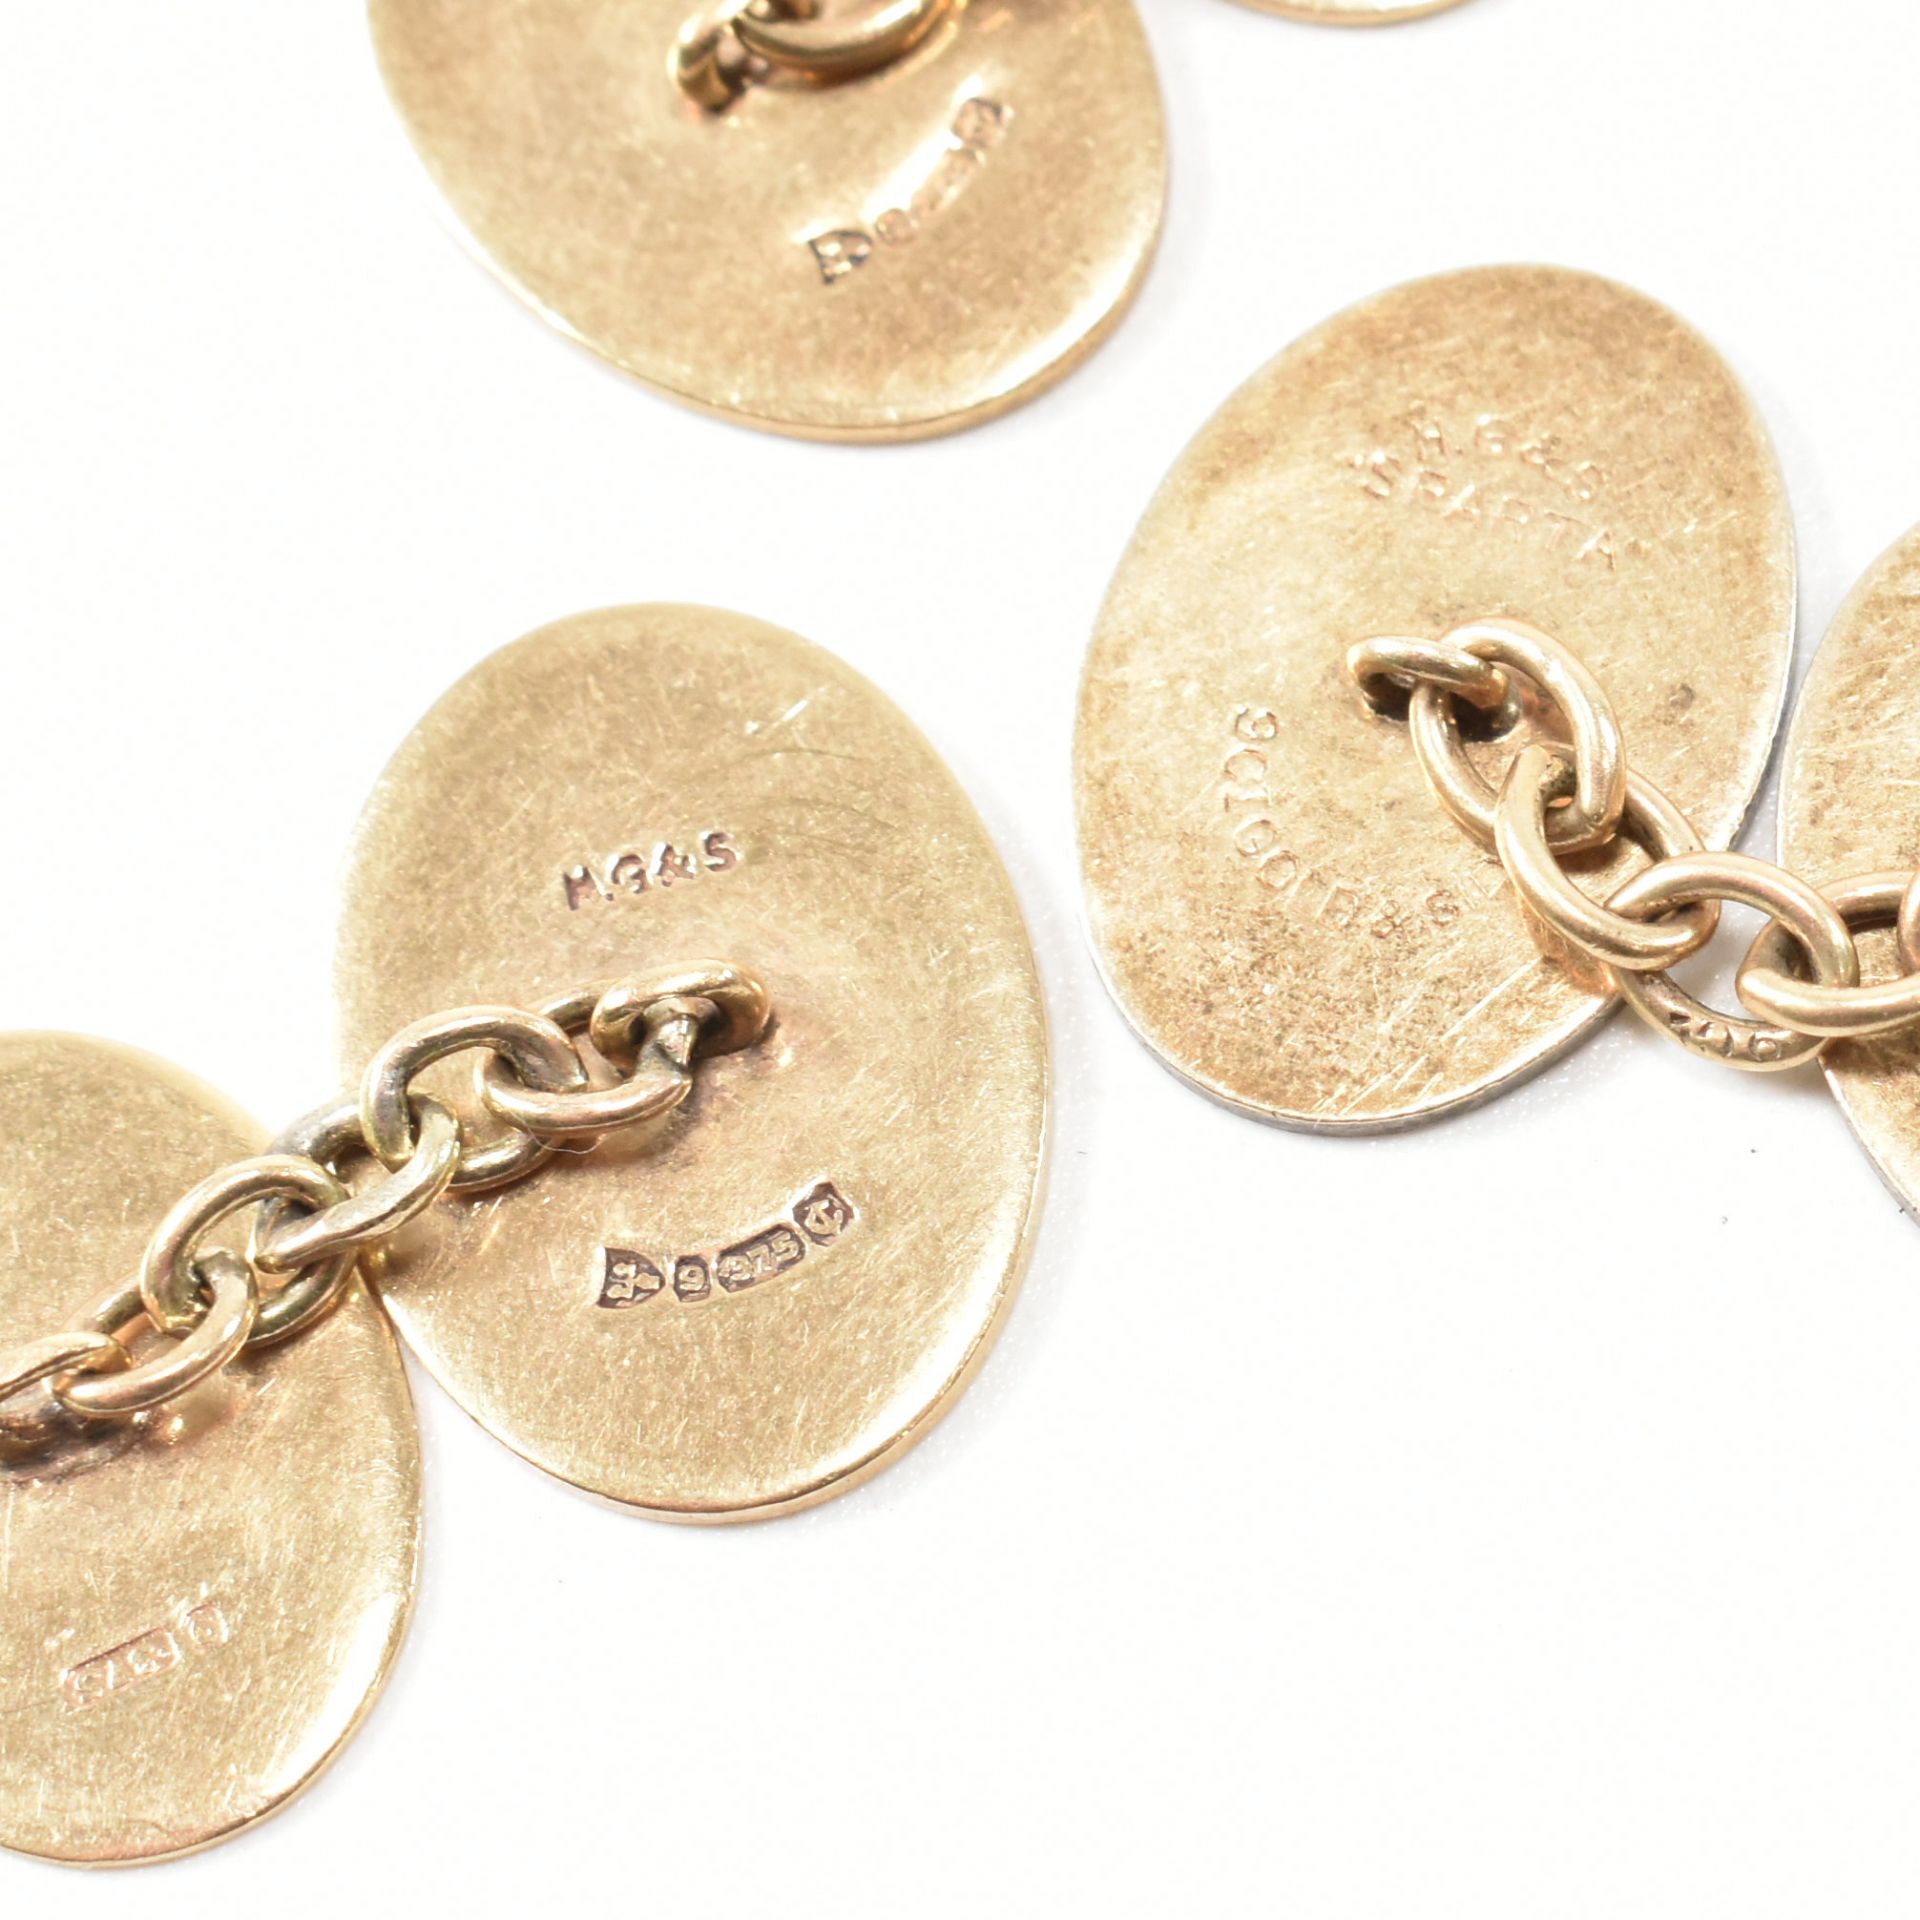 A PAIR OF 9CT GOLD CUFFLINKS & 9CT GOLD ON SILVER CUFFLINKS - Image 5 of 5